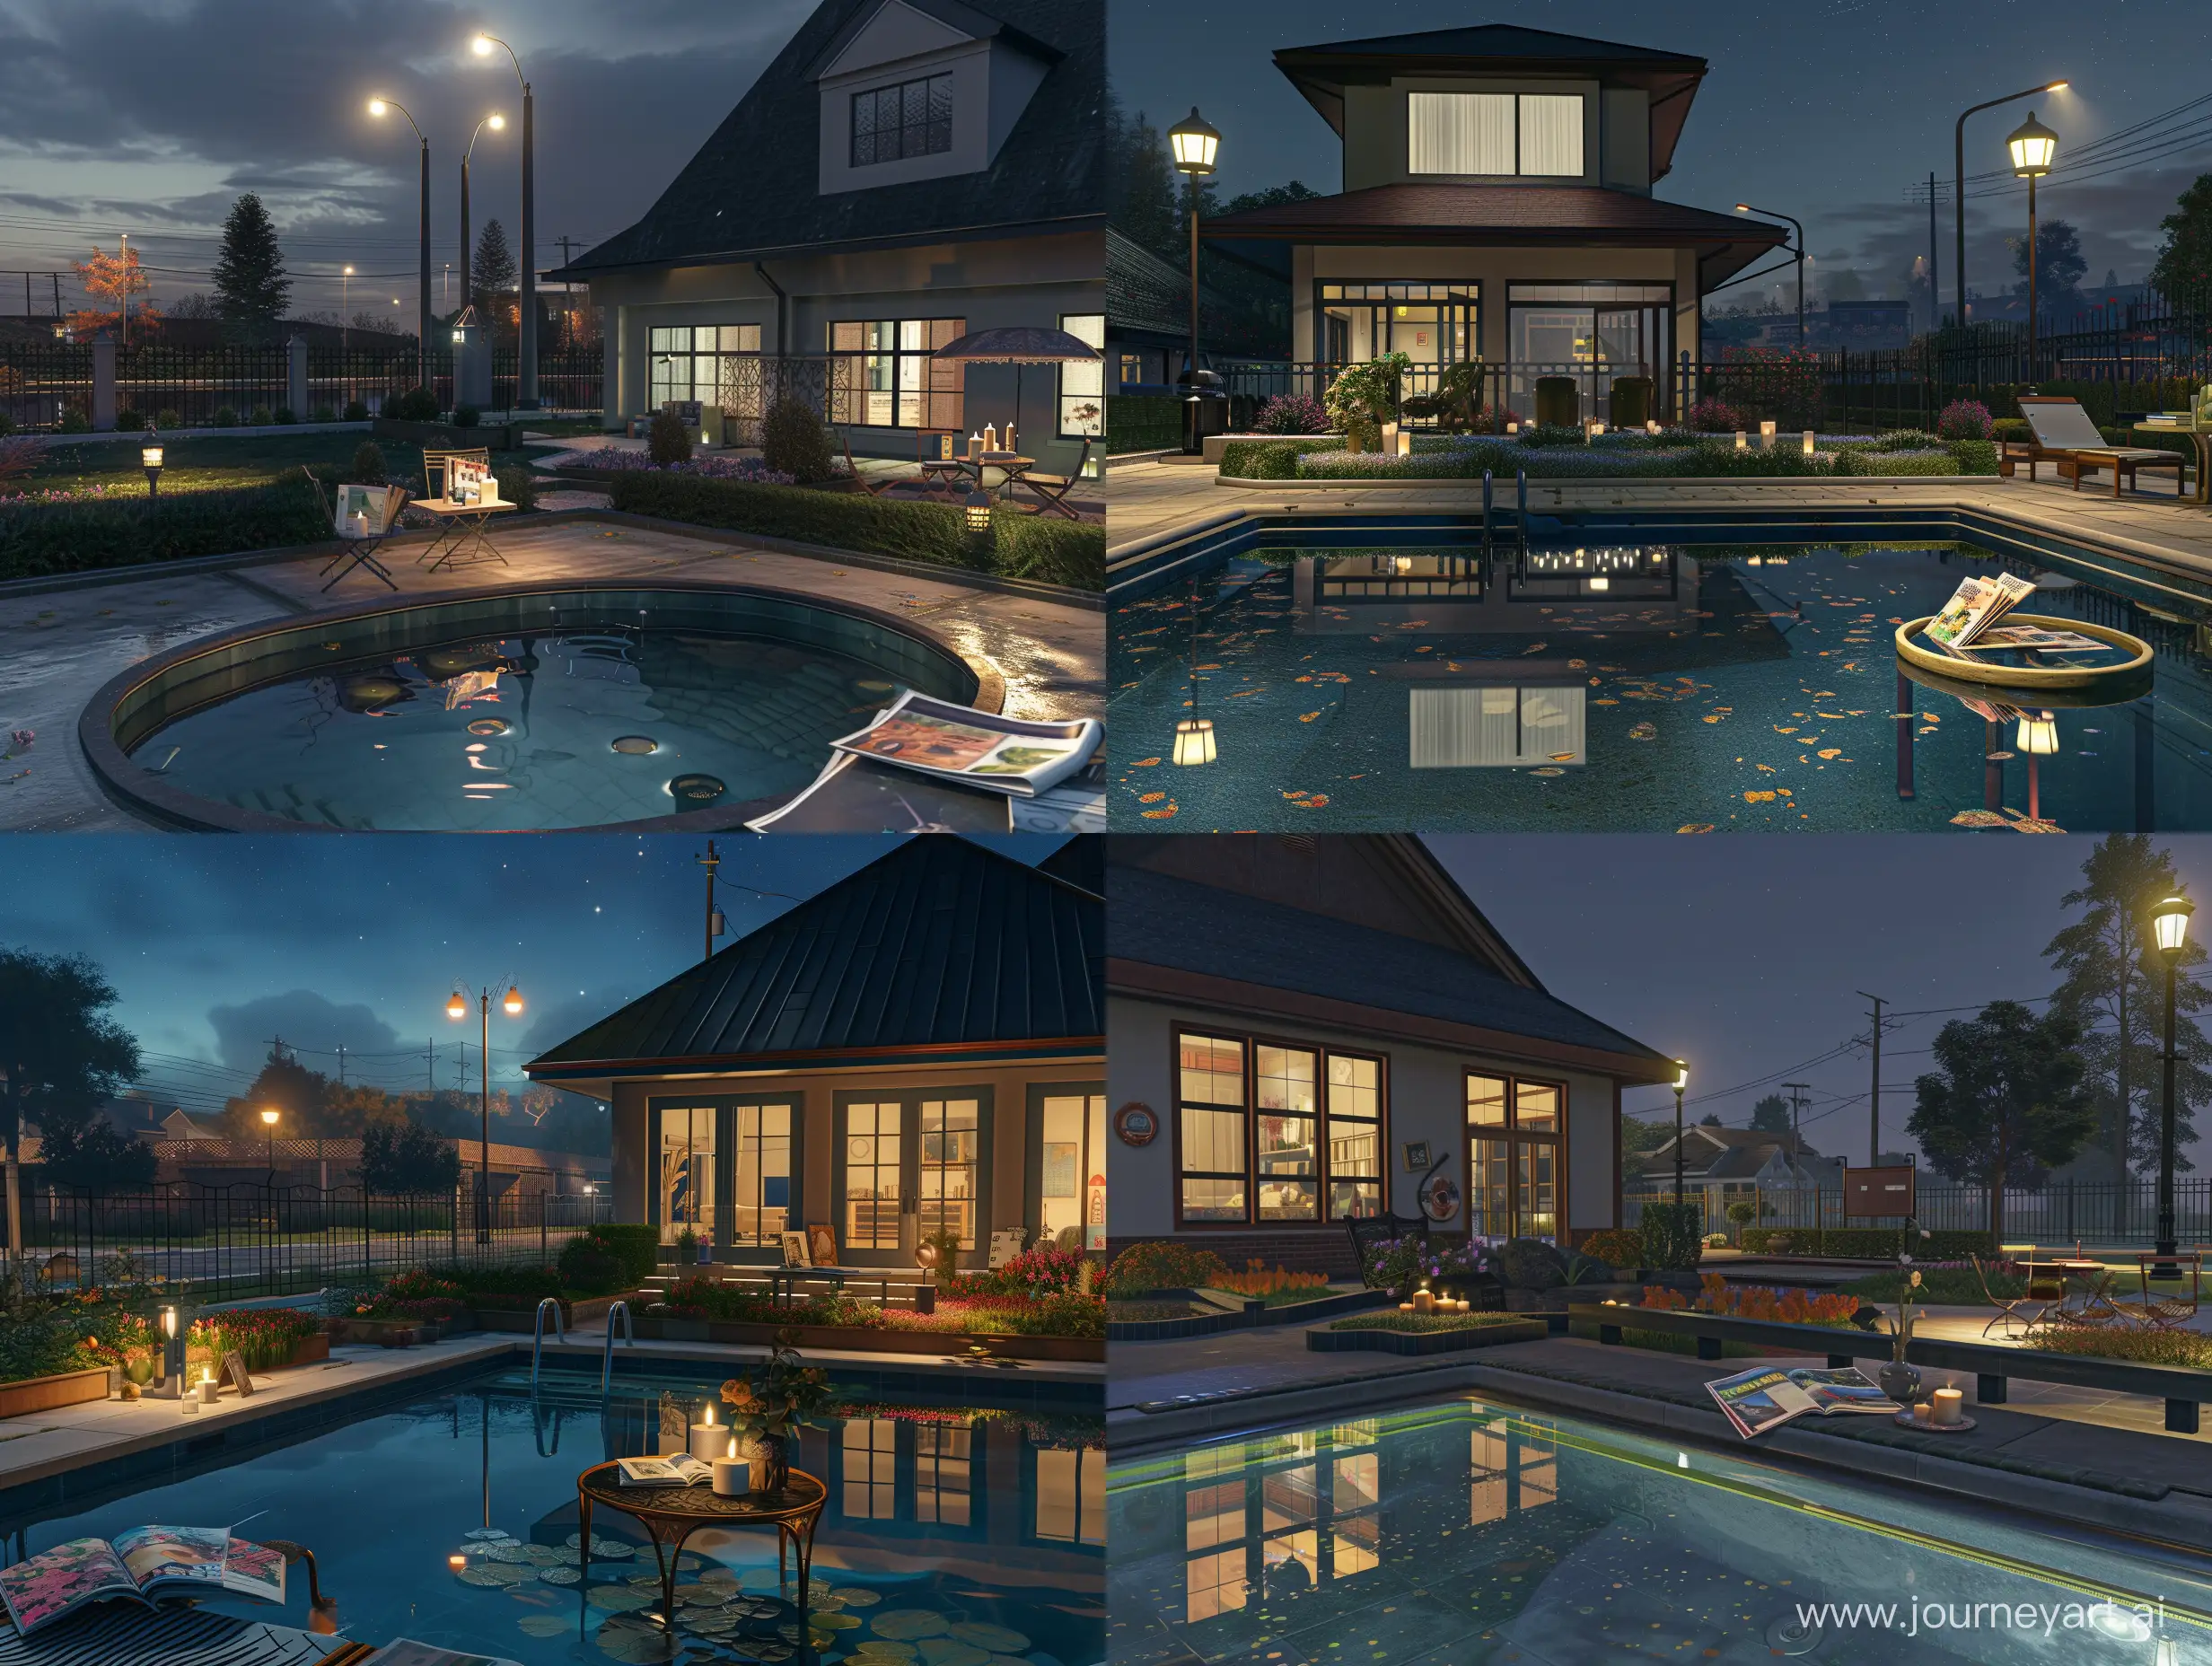 Full growth beautiful american style large house with a roof, and windows, at night. big beautiful night skies. a backyard with gardens. a mini swimming pool, with edging and small steps. modern garden. street lamps. reflecting in the clear transparent water. near of the pool a little table with magazines and candles. there are two chairs near the table. a fence with a gate. A street in the background. low horizon line. 8k, ultrarealism, unreal engine